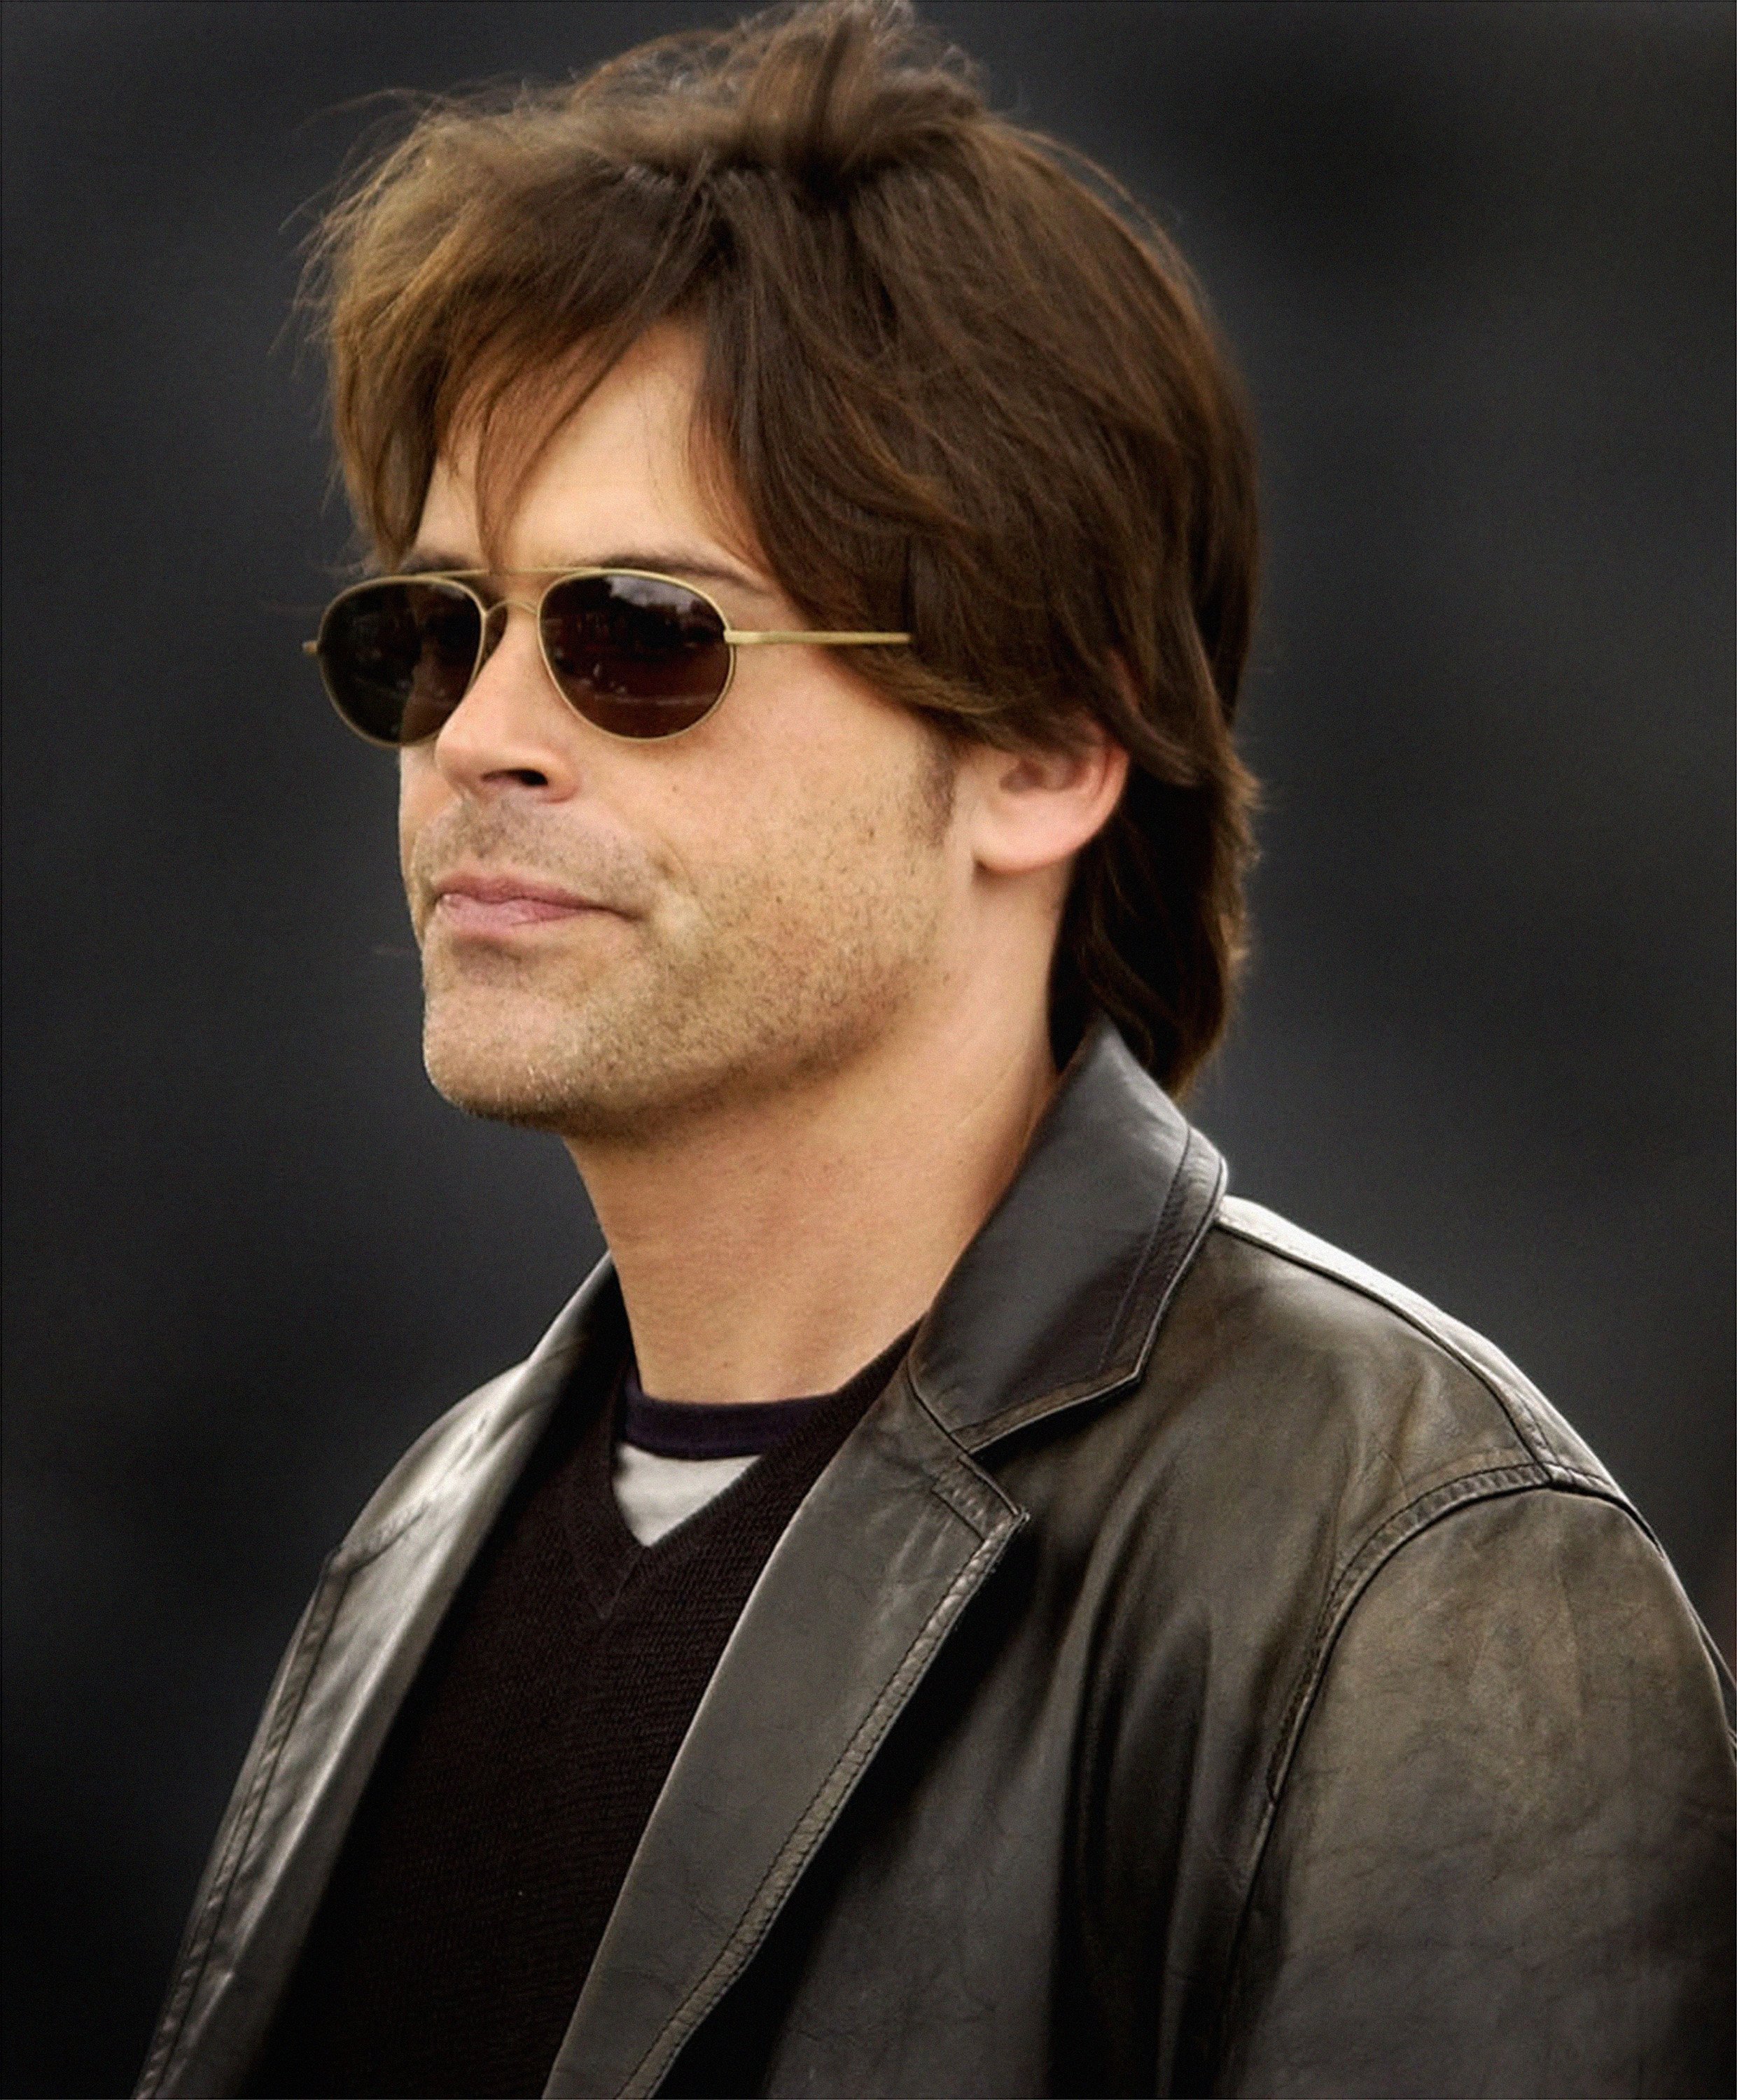 Rob Lowe during the shooting of the mini-series "Salems Lot" on April 30, 2003 in Creswick in Victoria, Australia. / Source: Getty Images